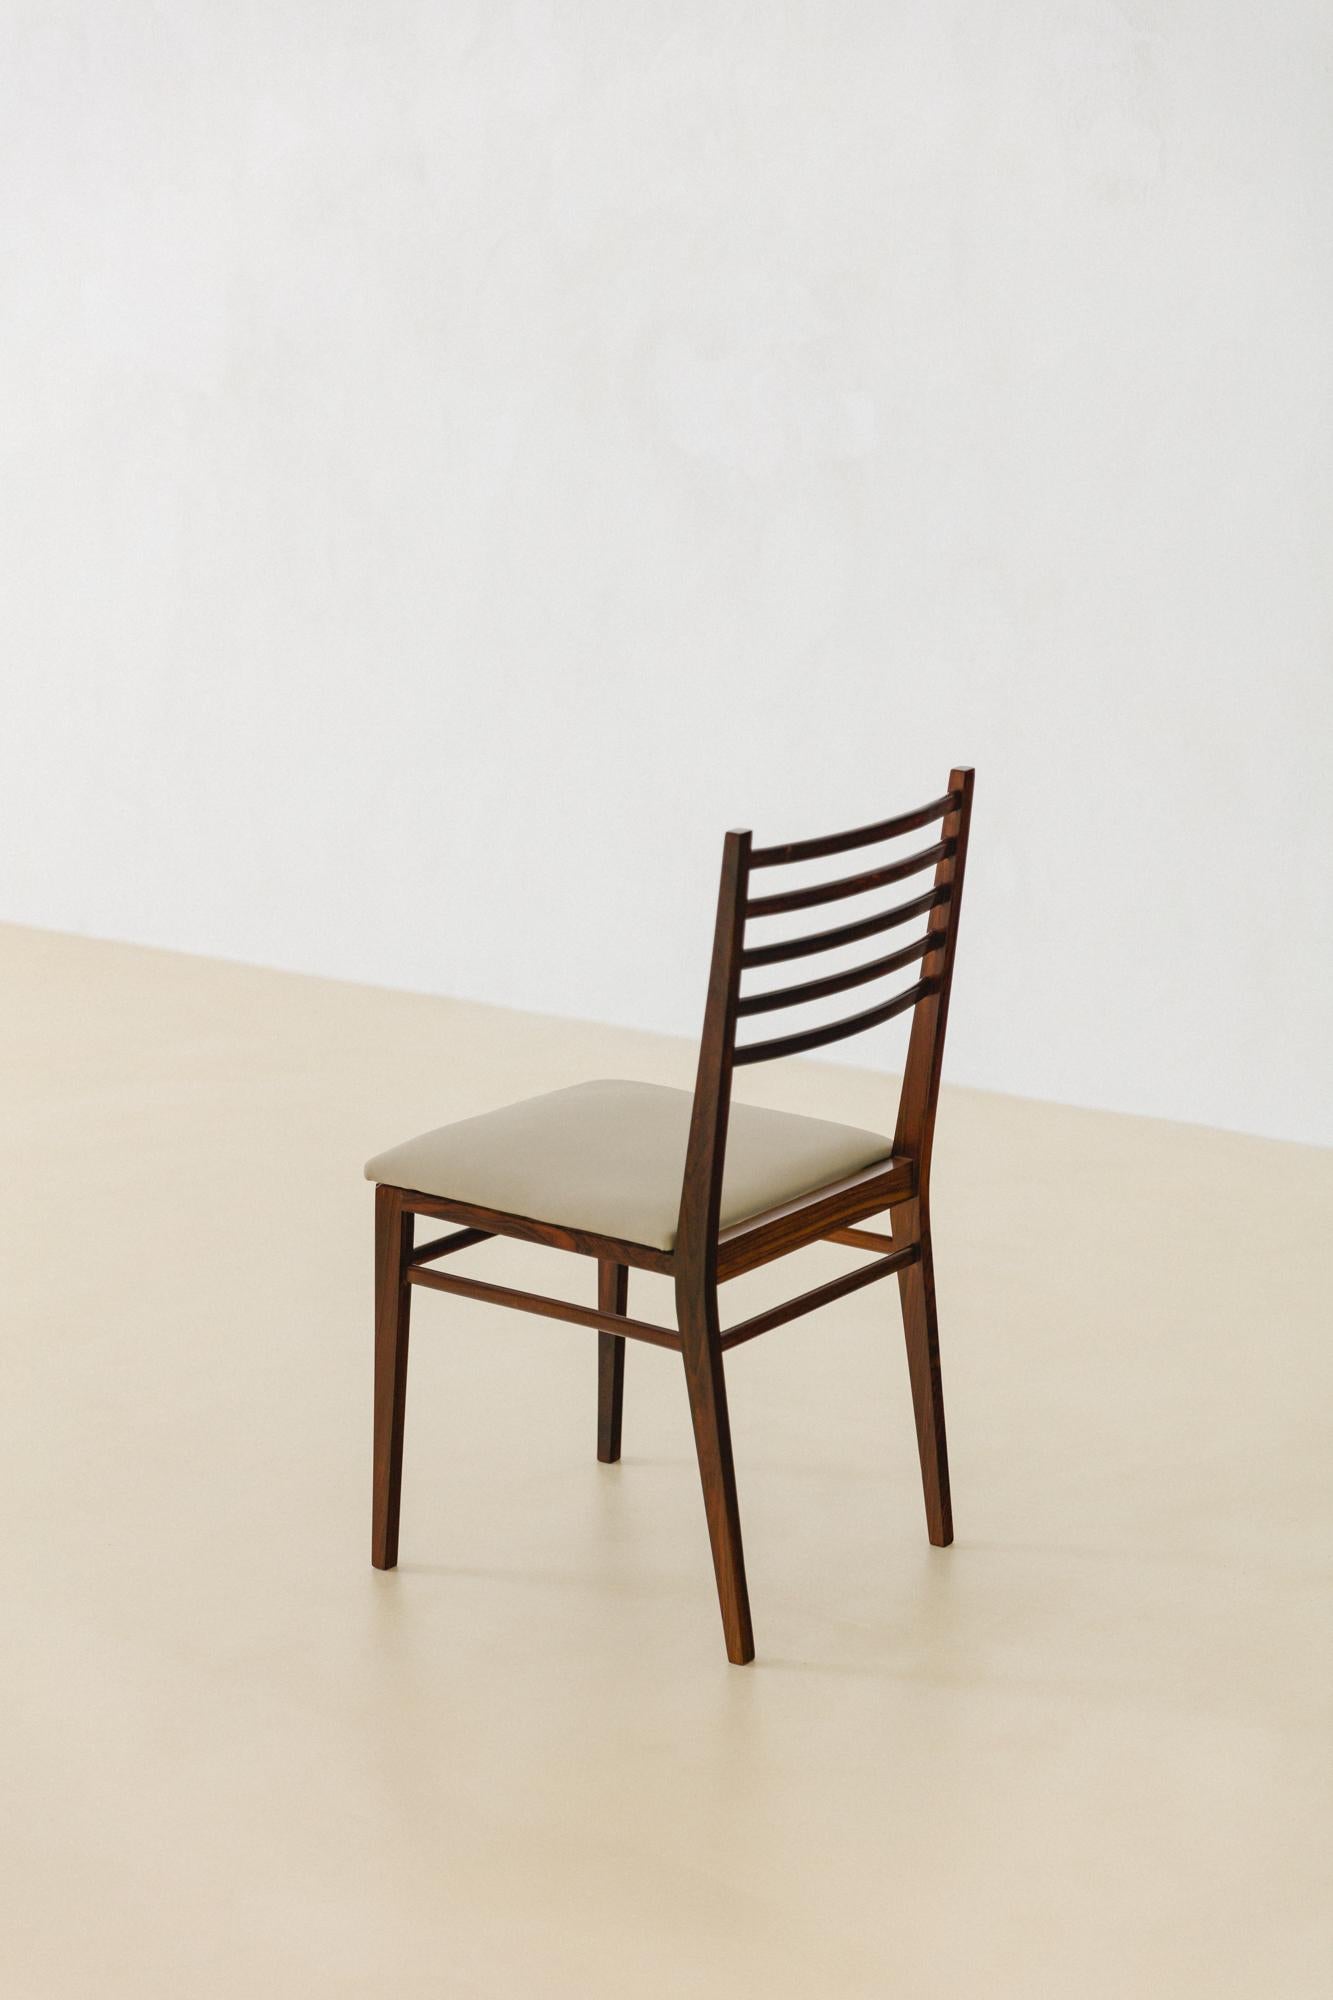 Mid-20th Century Set of Six Chairs in Rosewood, Model 4015 by Geraldo de Barros, Unilabor, 1950s For Sale